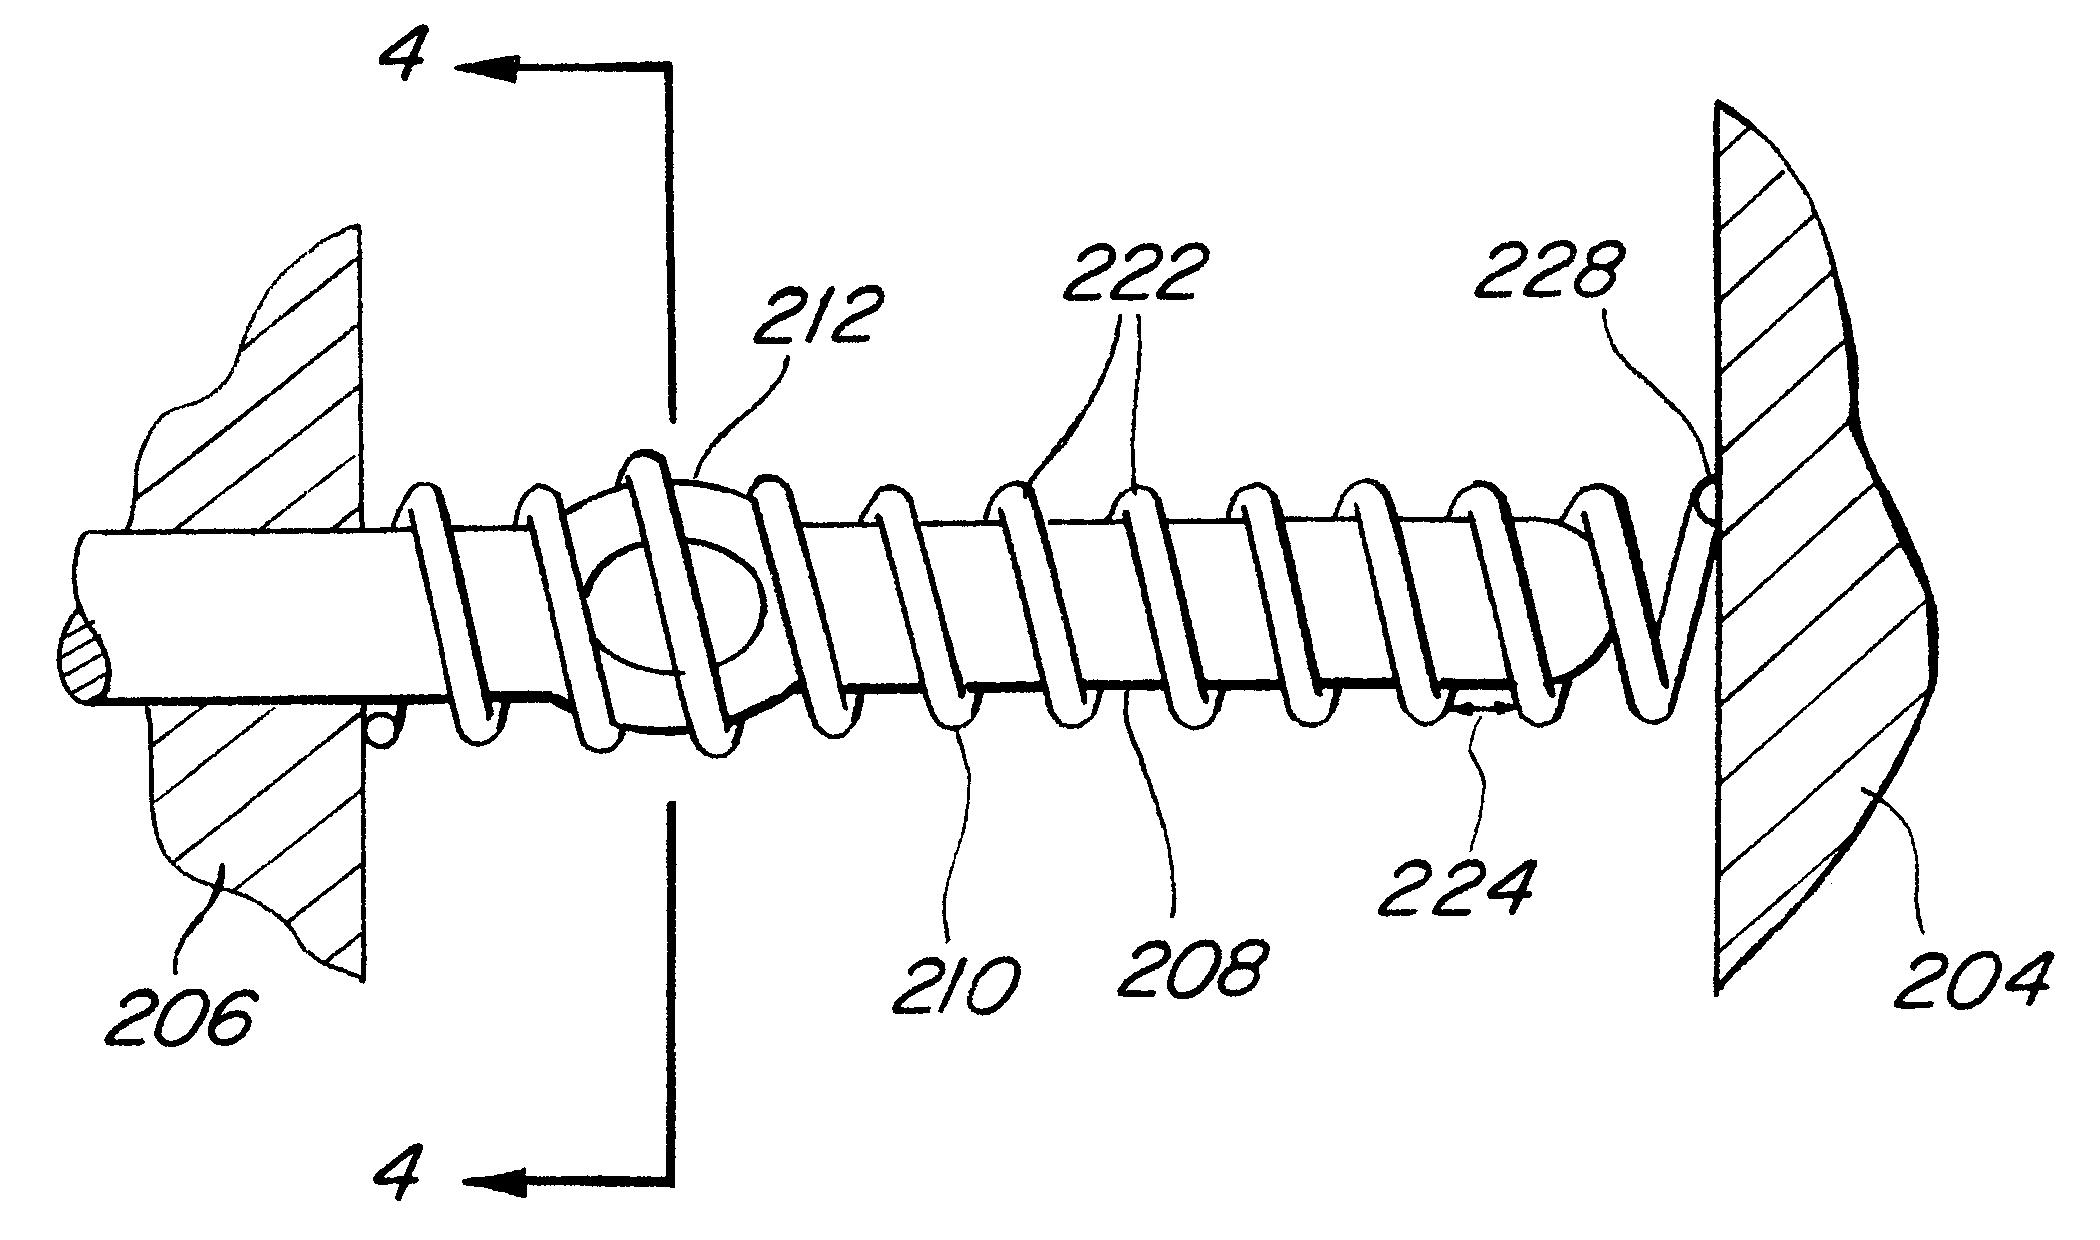 Electrical connection to a coil spring through a local interference fit for connection to a vibratory rotation sensor and method of forming the same